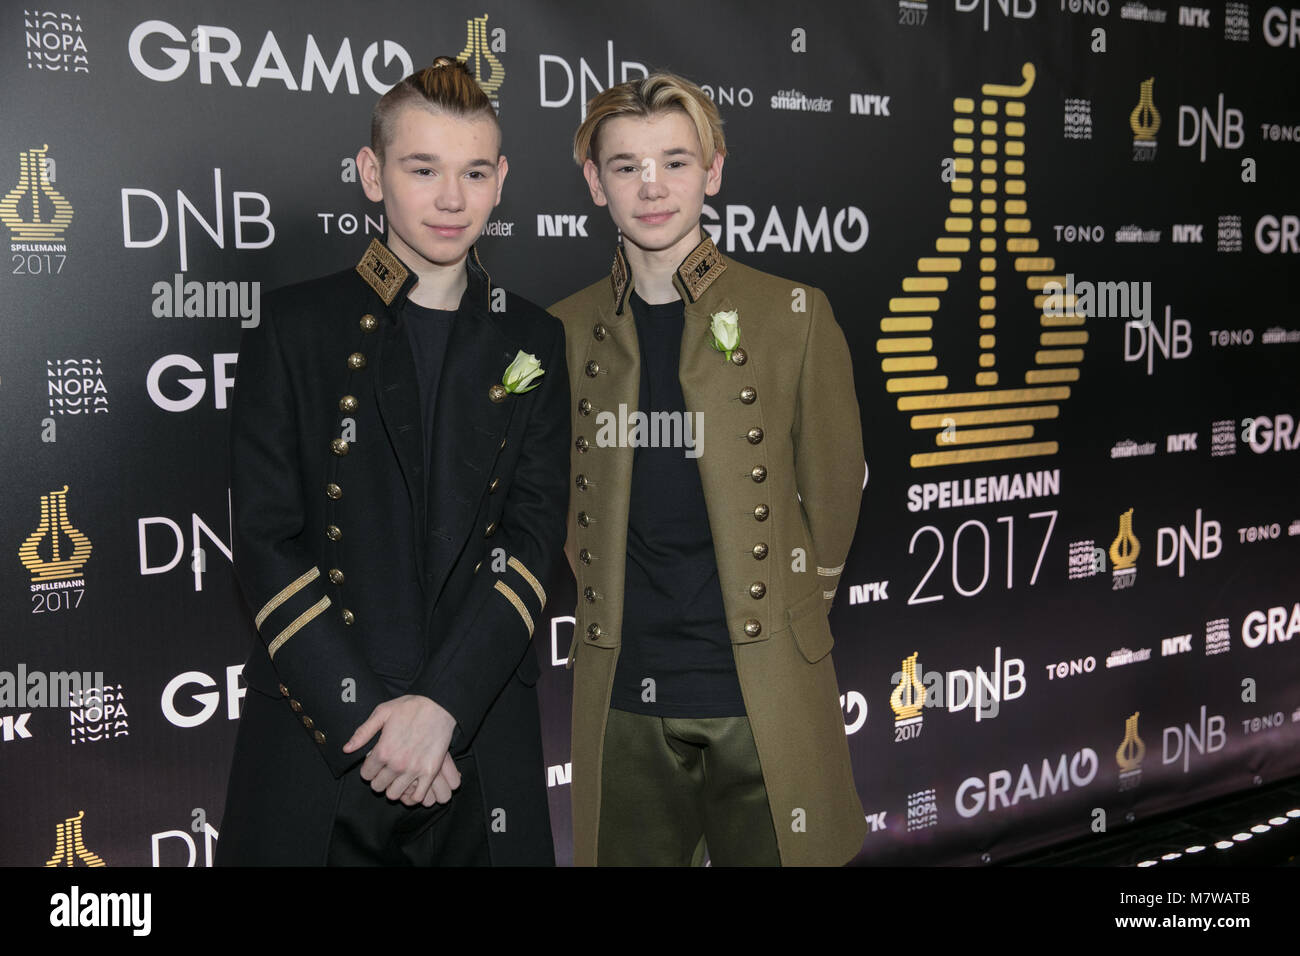 Marcus and martinus hi-res stock and images - Alamy